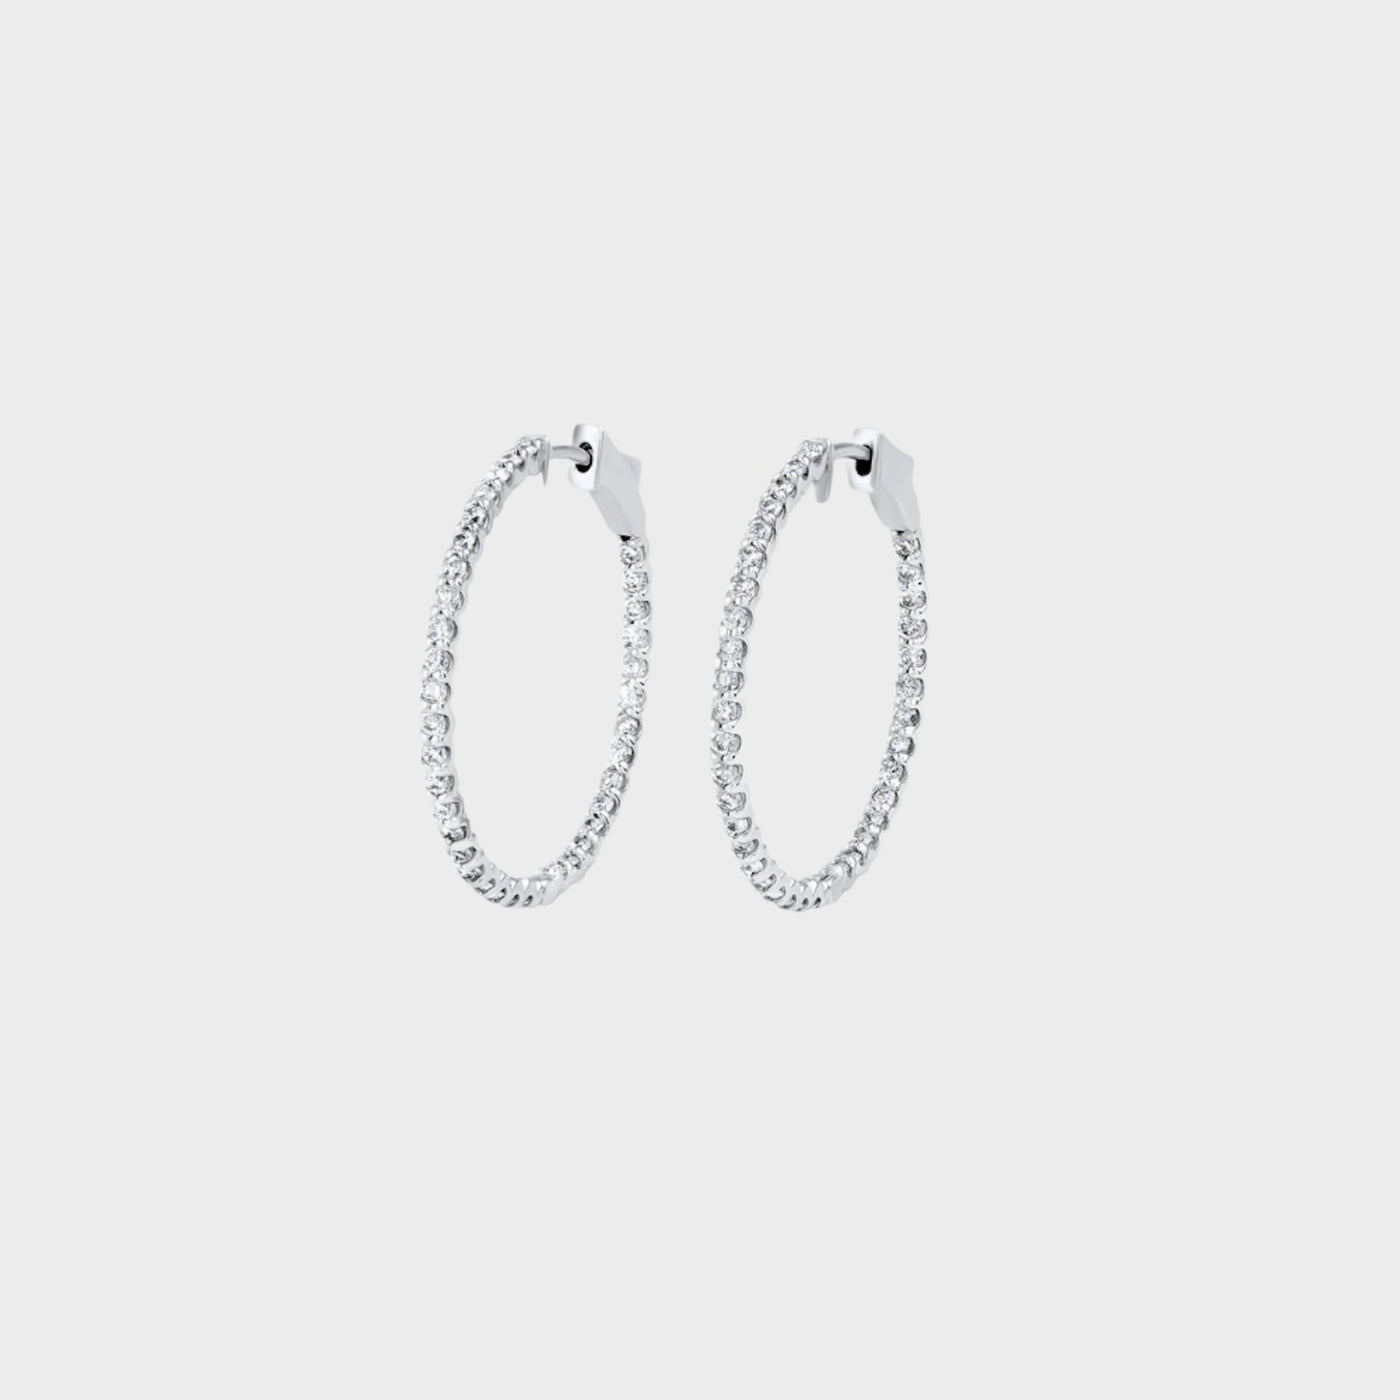 Inside Out Diamond Hoops - The Clear Cut Collection